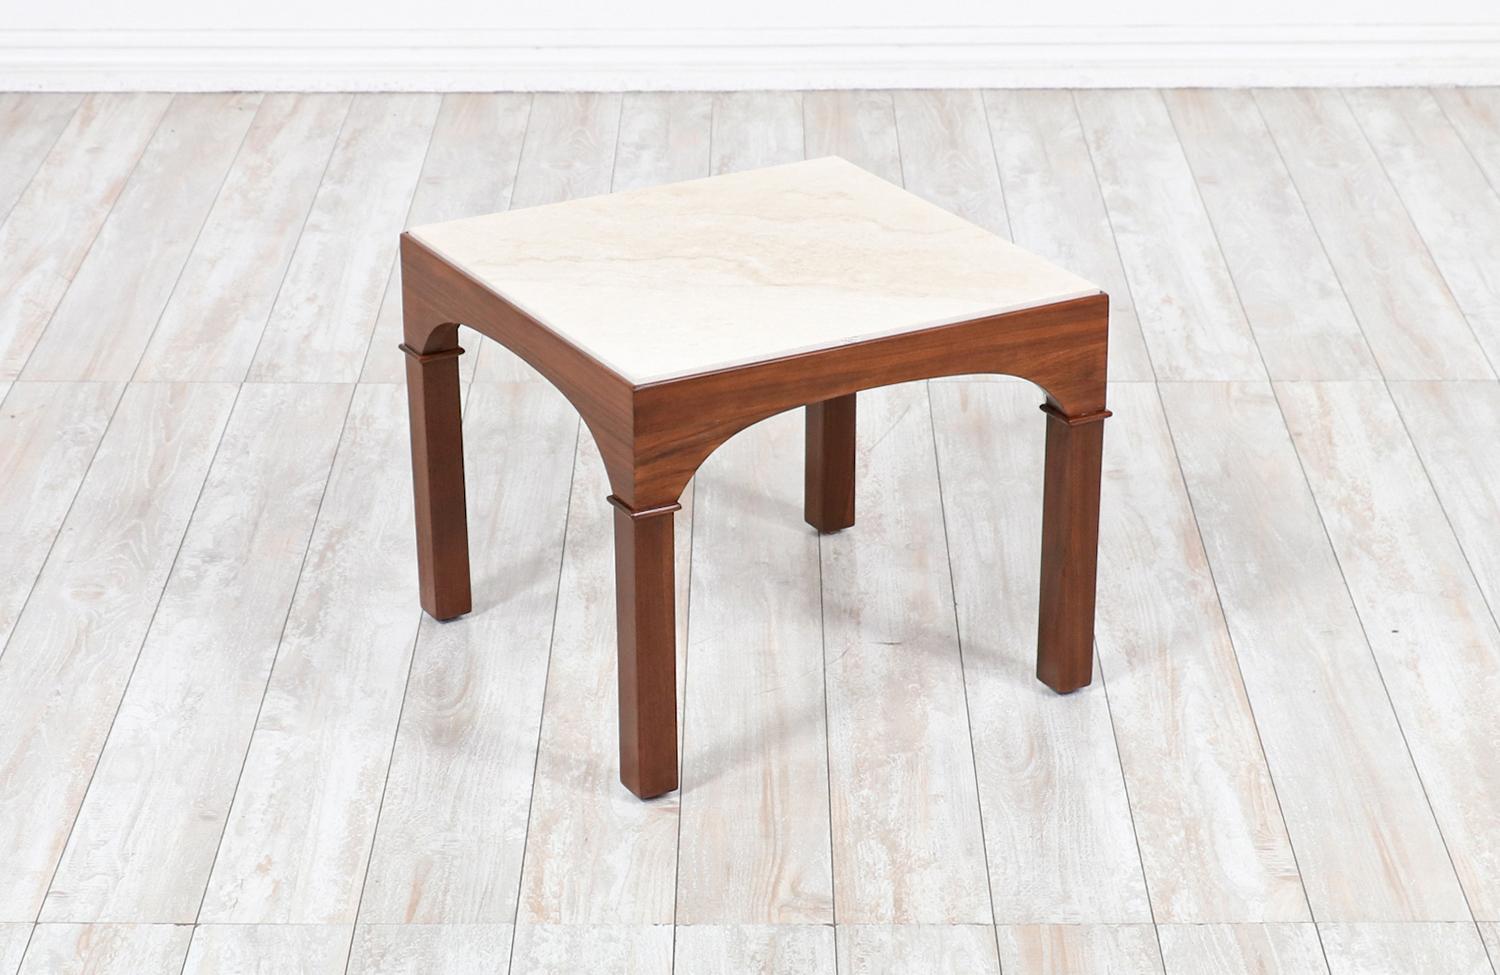 Stylish side table designed by John Keal and manufactured by brown Saltman in the United States circa 1950’s. This unique design has been recently refinished by our skilled team of craftsmen in Los Angeles workshop and features its original